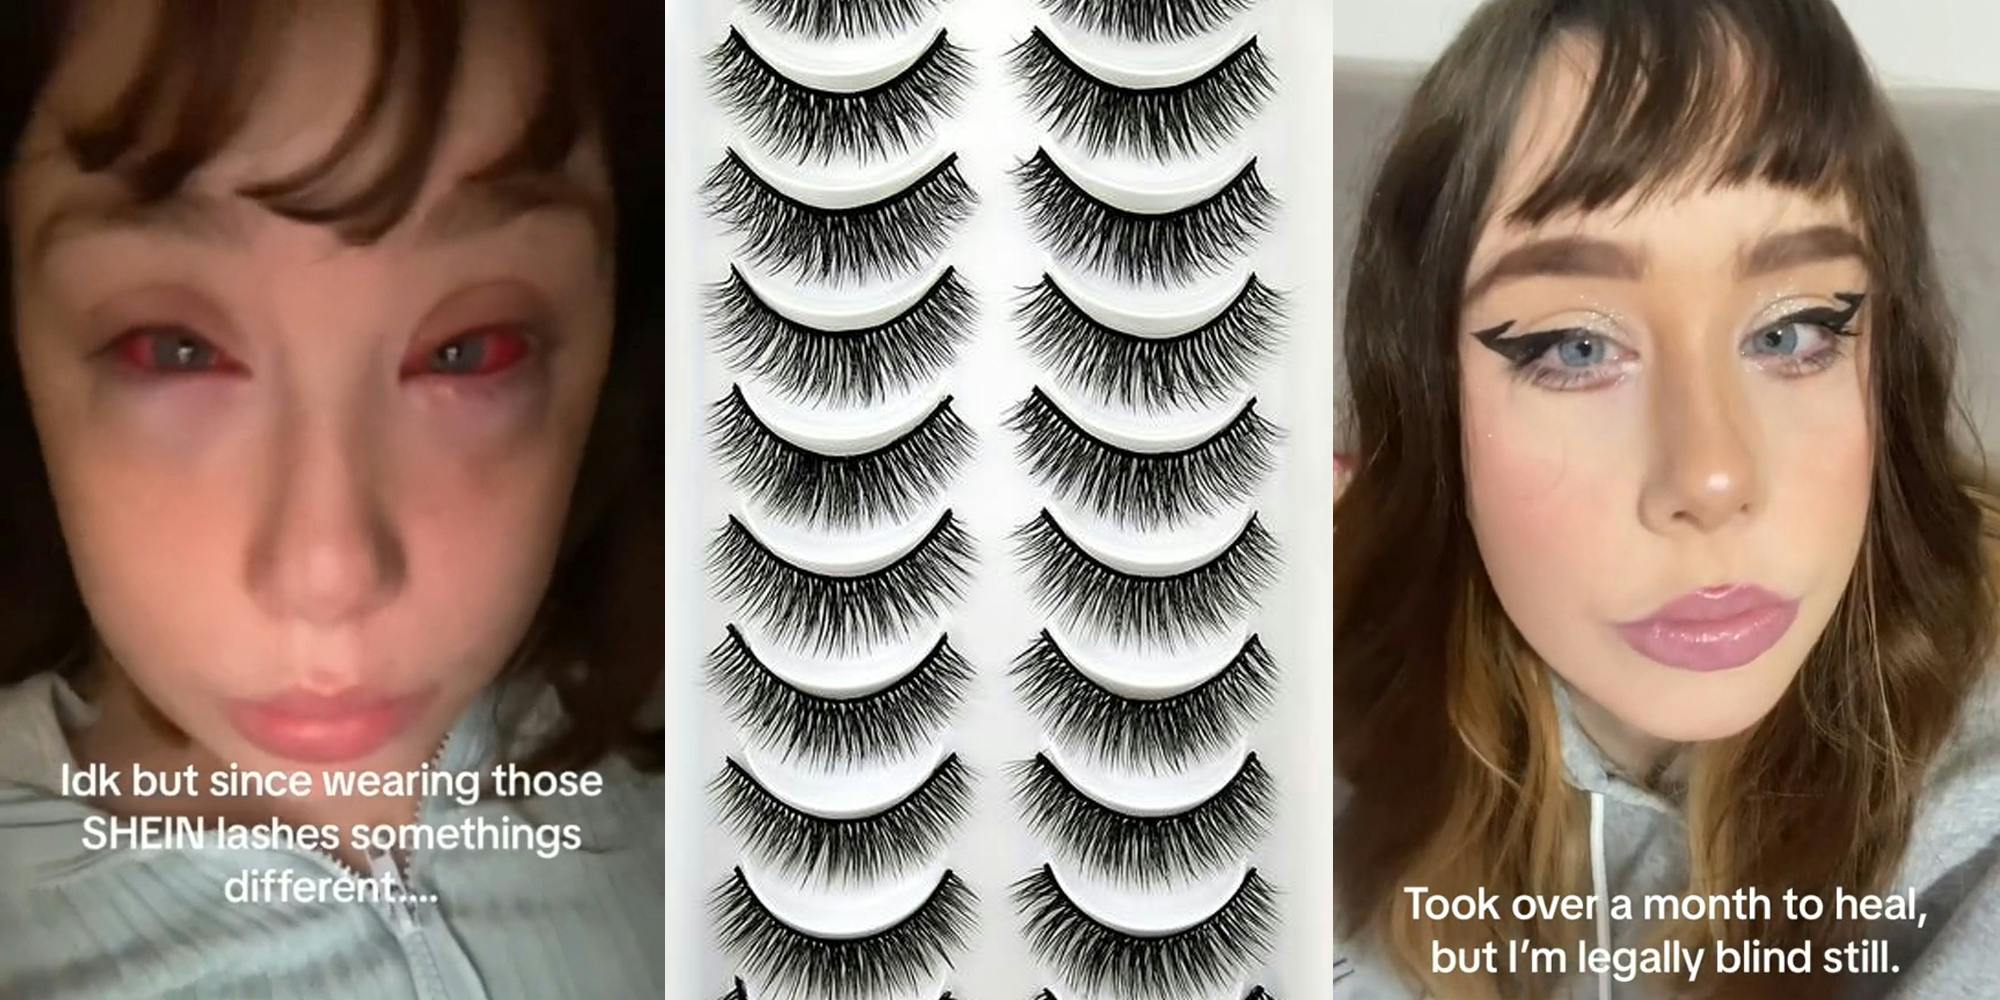 young woman with red eyes and caption "idk but since wearing those SHEIN lashes somethings different..." (l) fake lashes (c) young woman with caption "Took over a month to heal, but I'm legally blind still." (r)